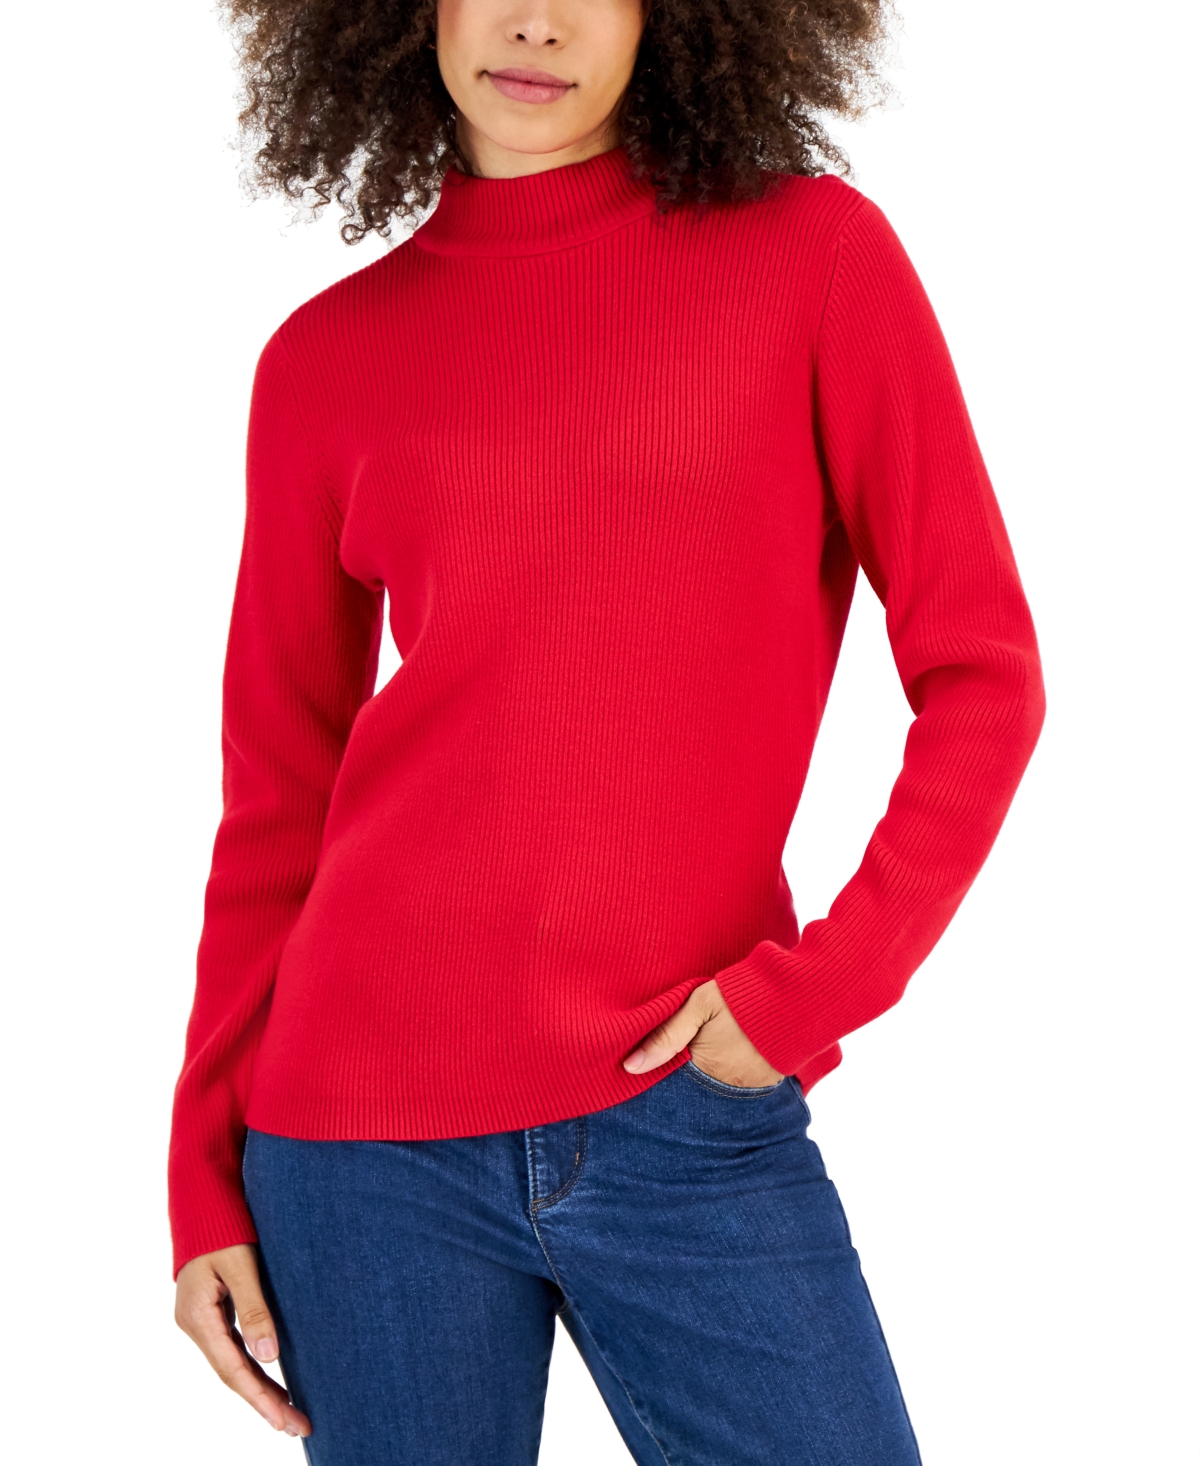 Women's Mock-Neck Sweater, Created for Macy's - New Red Amore